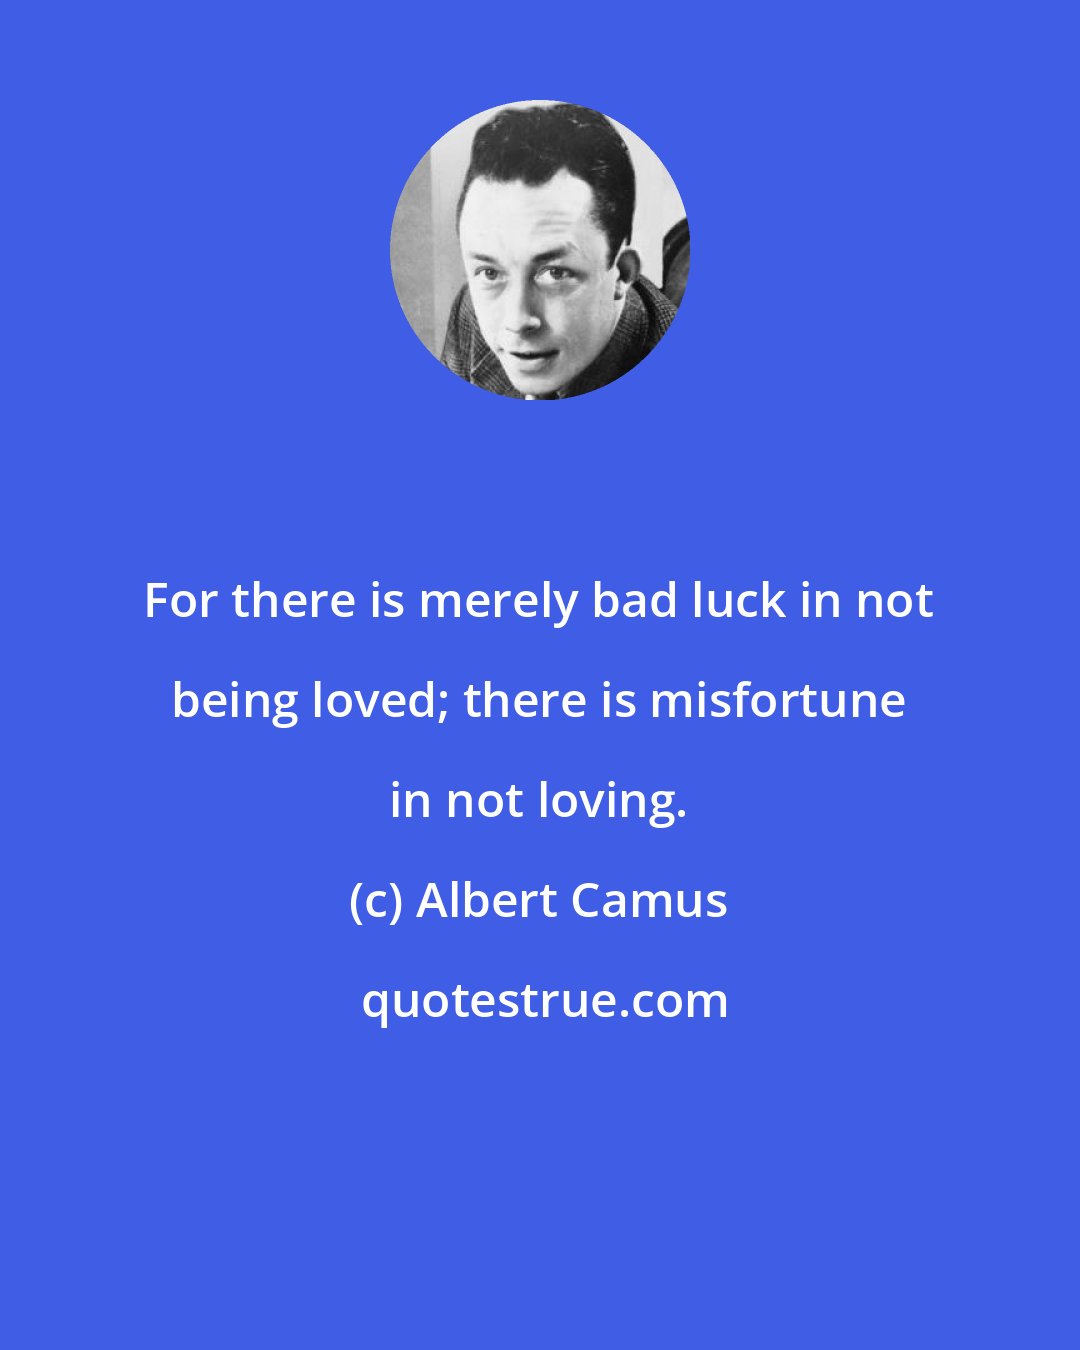 Albert Camus: For there is merely bad luck in not being loved; there is misfortune in not loving.